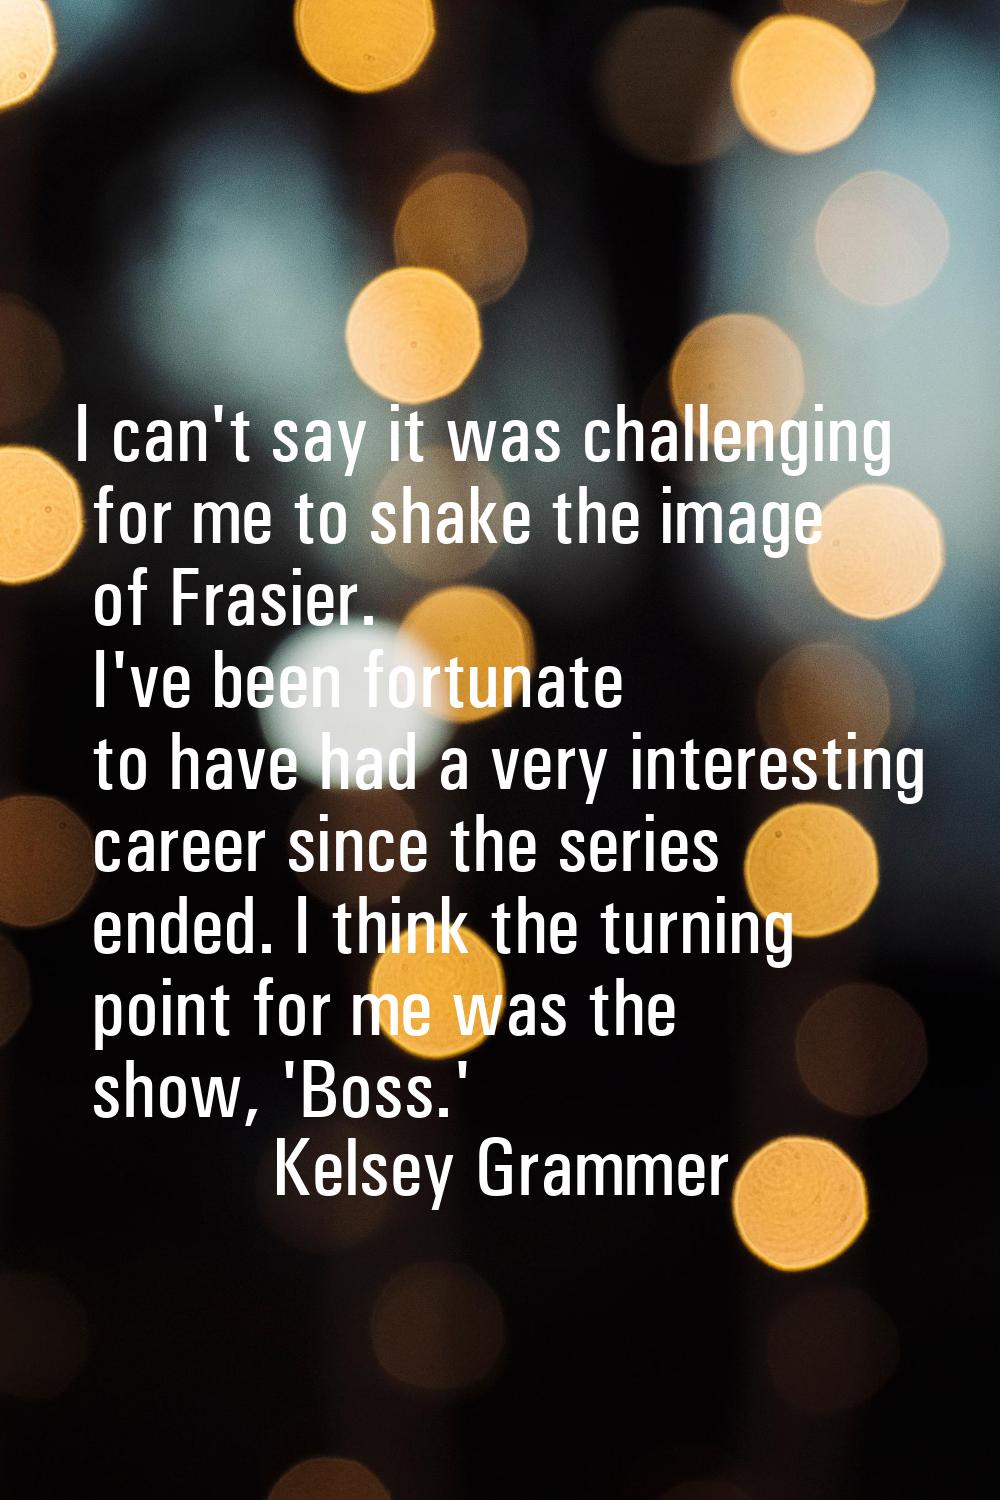 I can't say it was challenging for me to shake the image of Frasier. I've been fortunate to have ha